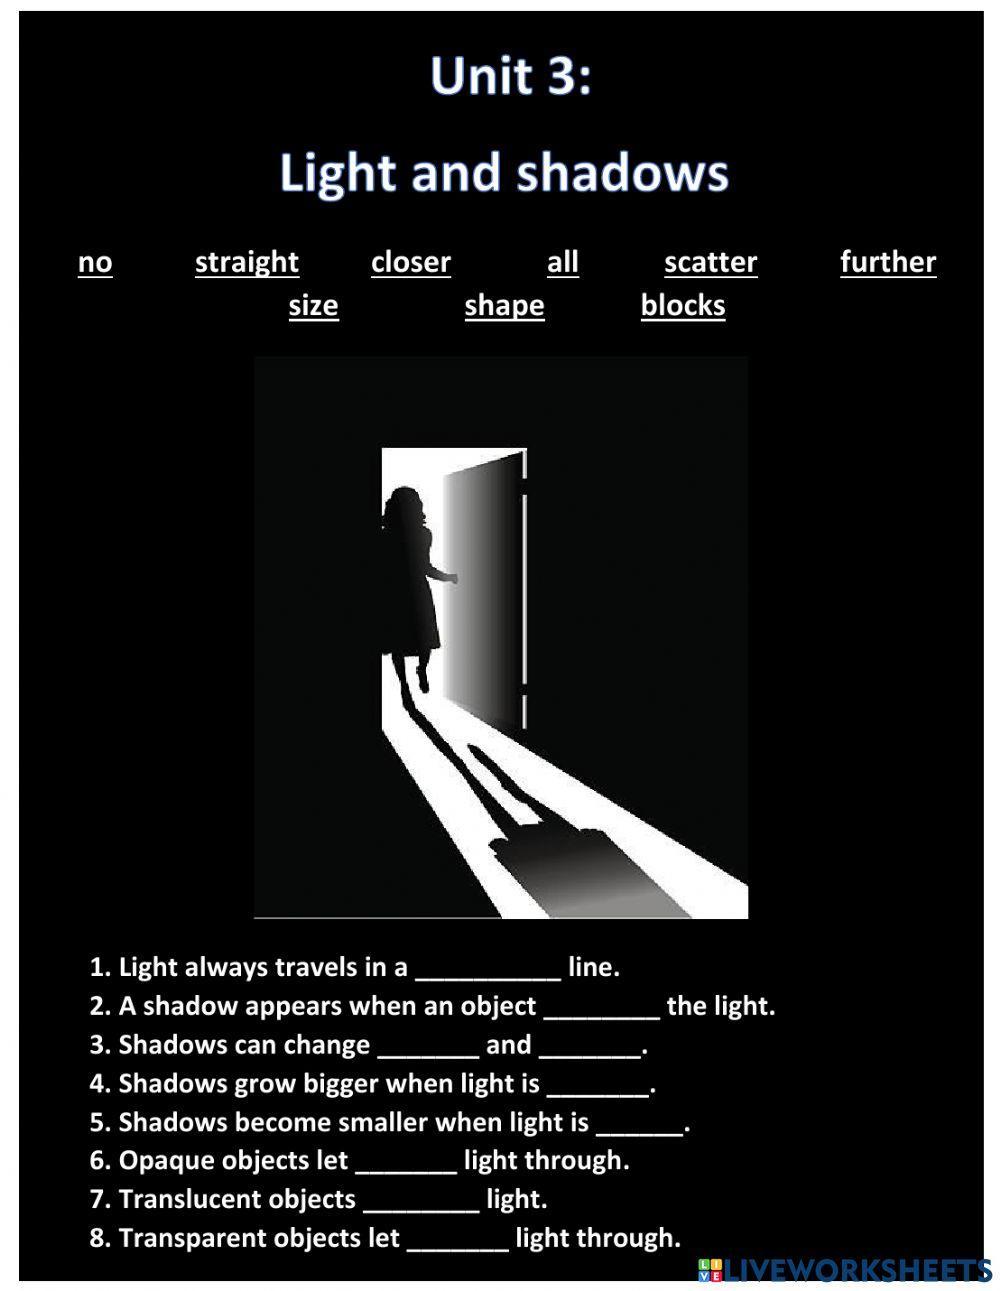 Light and Shadow